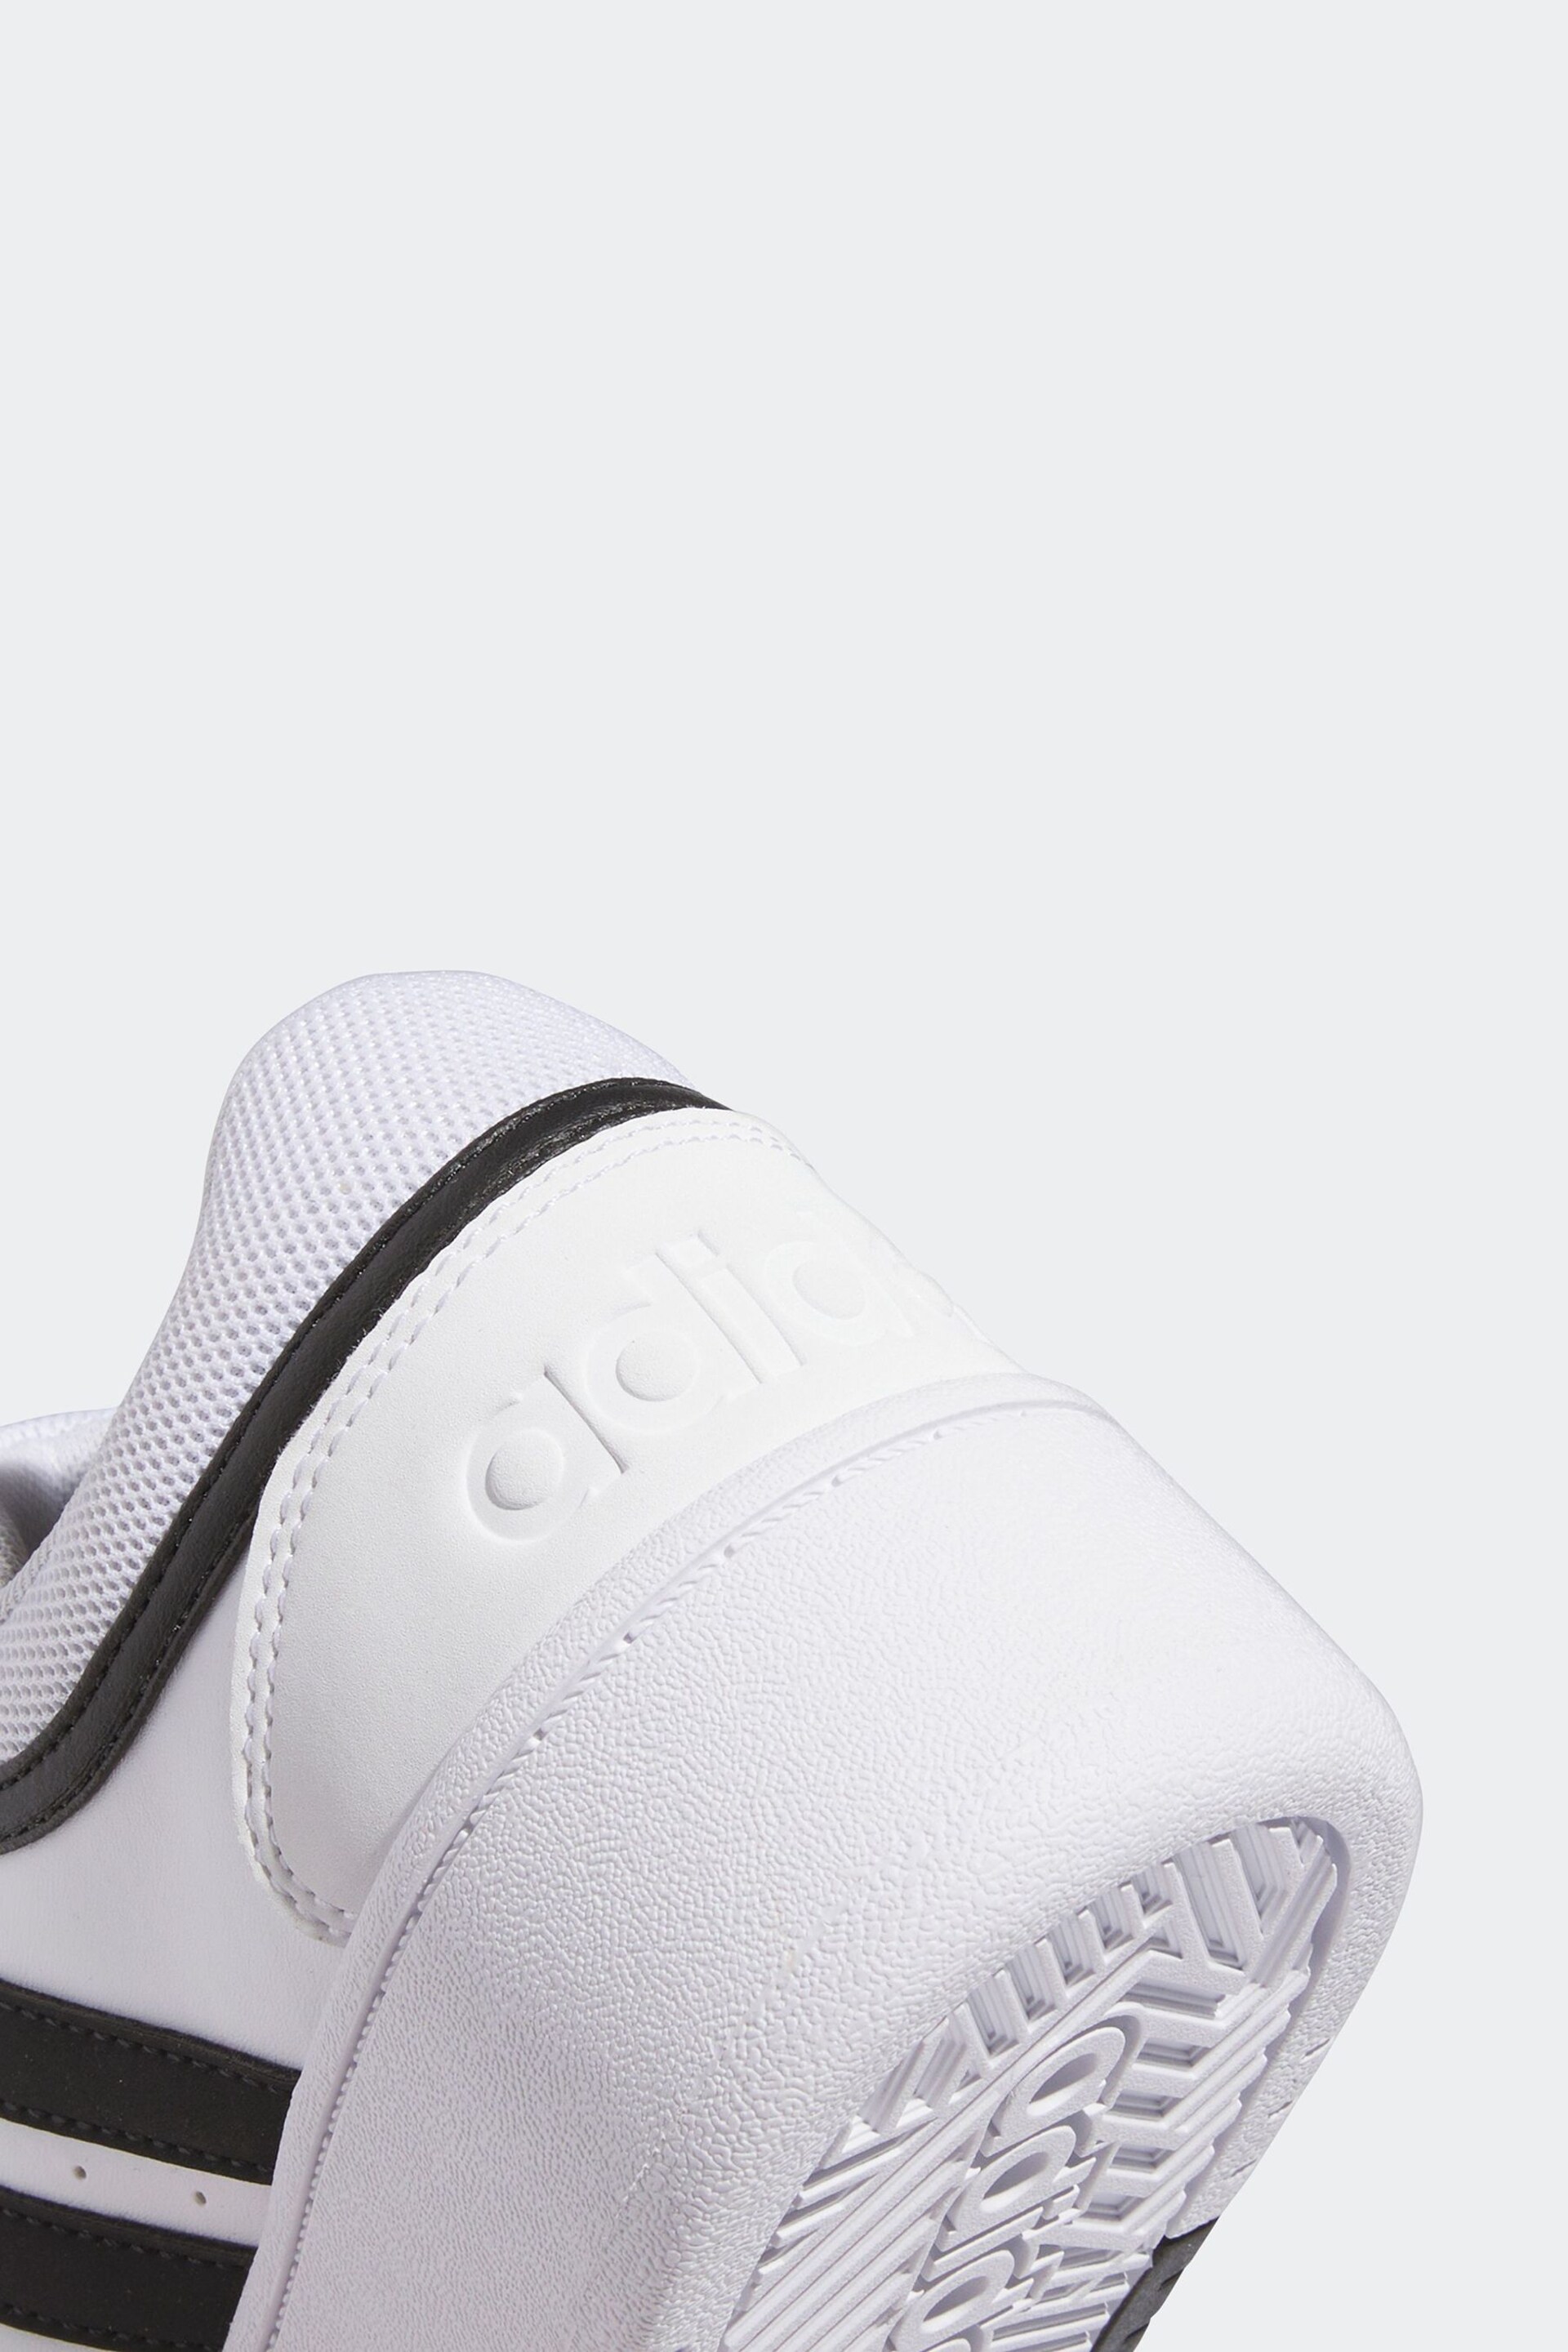 adidas Originals White/Black Hoops 3.0 Bold Trainers - Image 7 of 10